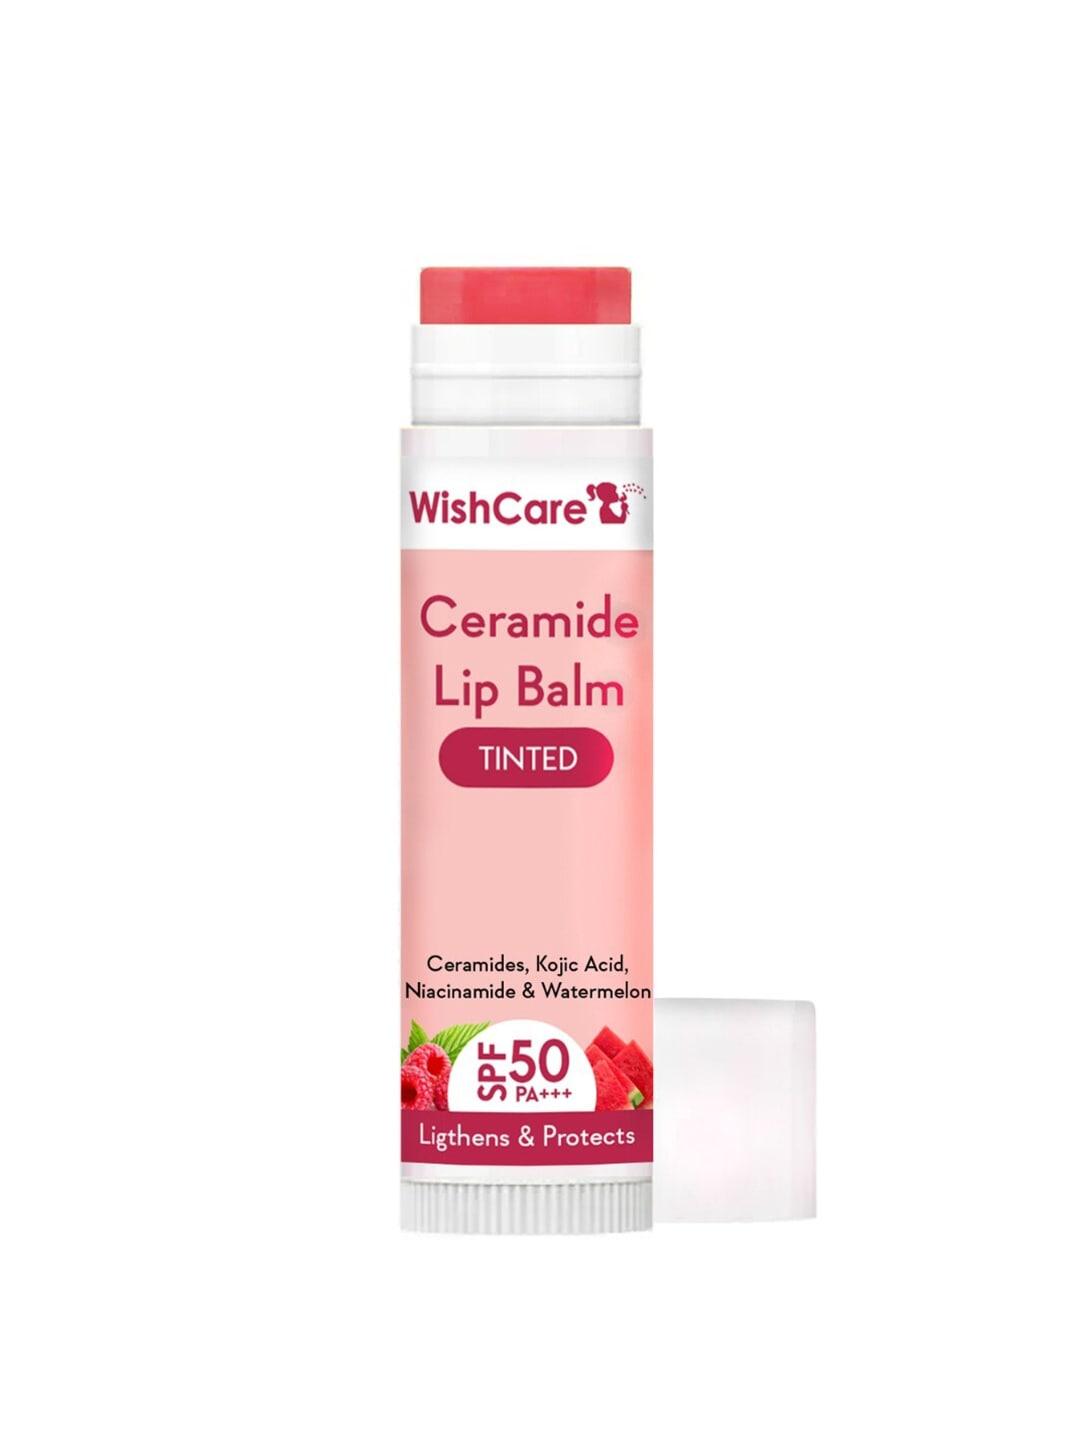 WishCare Ceramide Tinted Lip Balm With SPF50 PA+++ - 5g